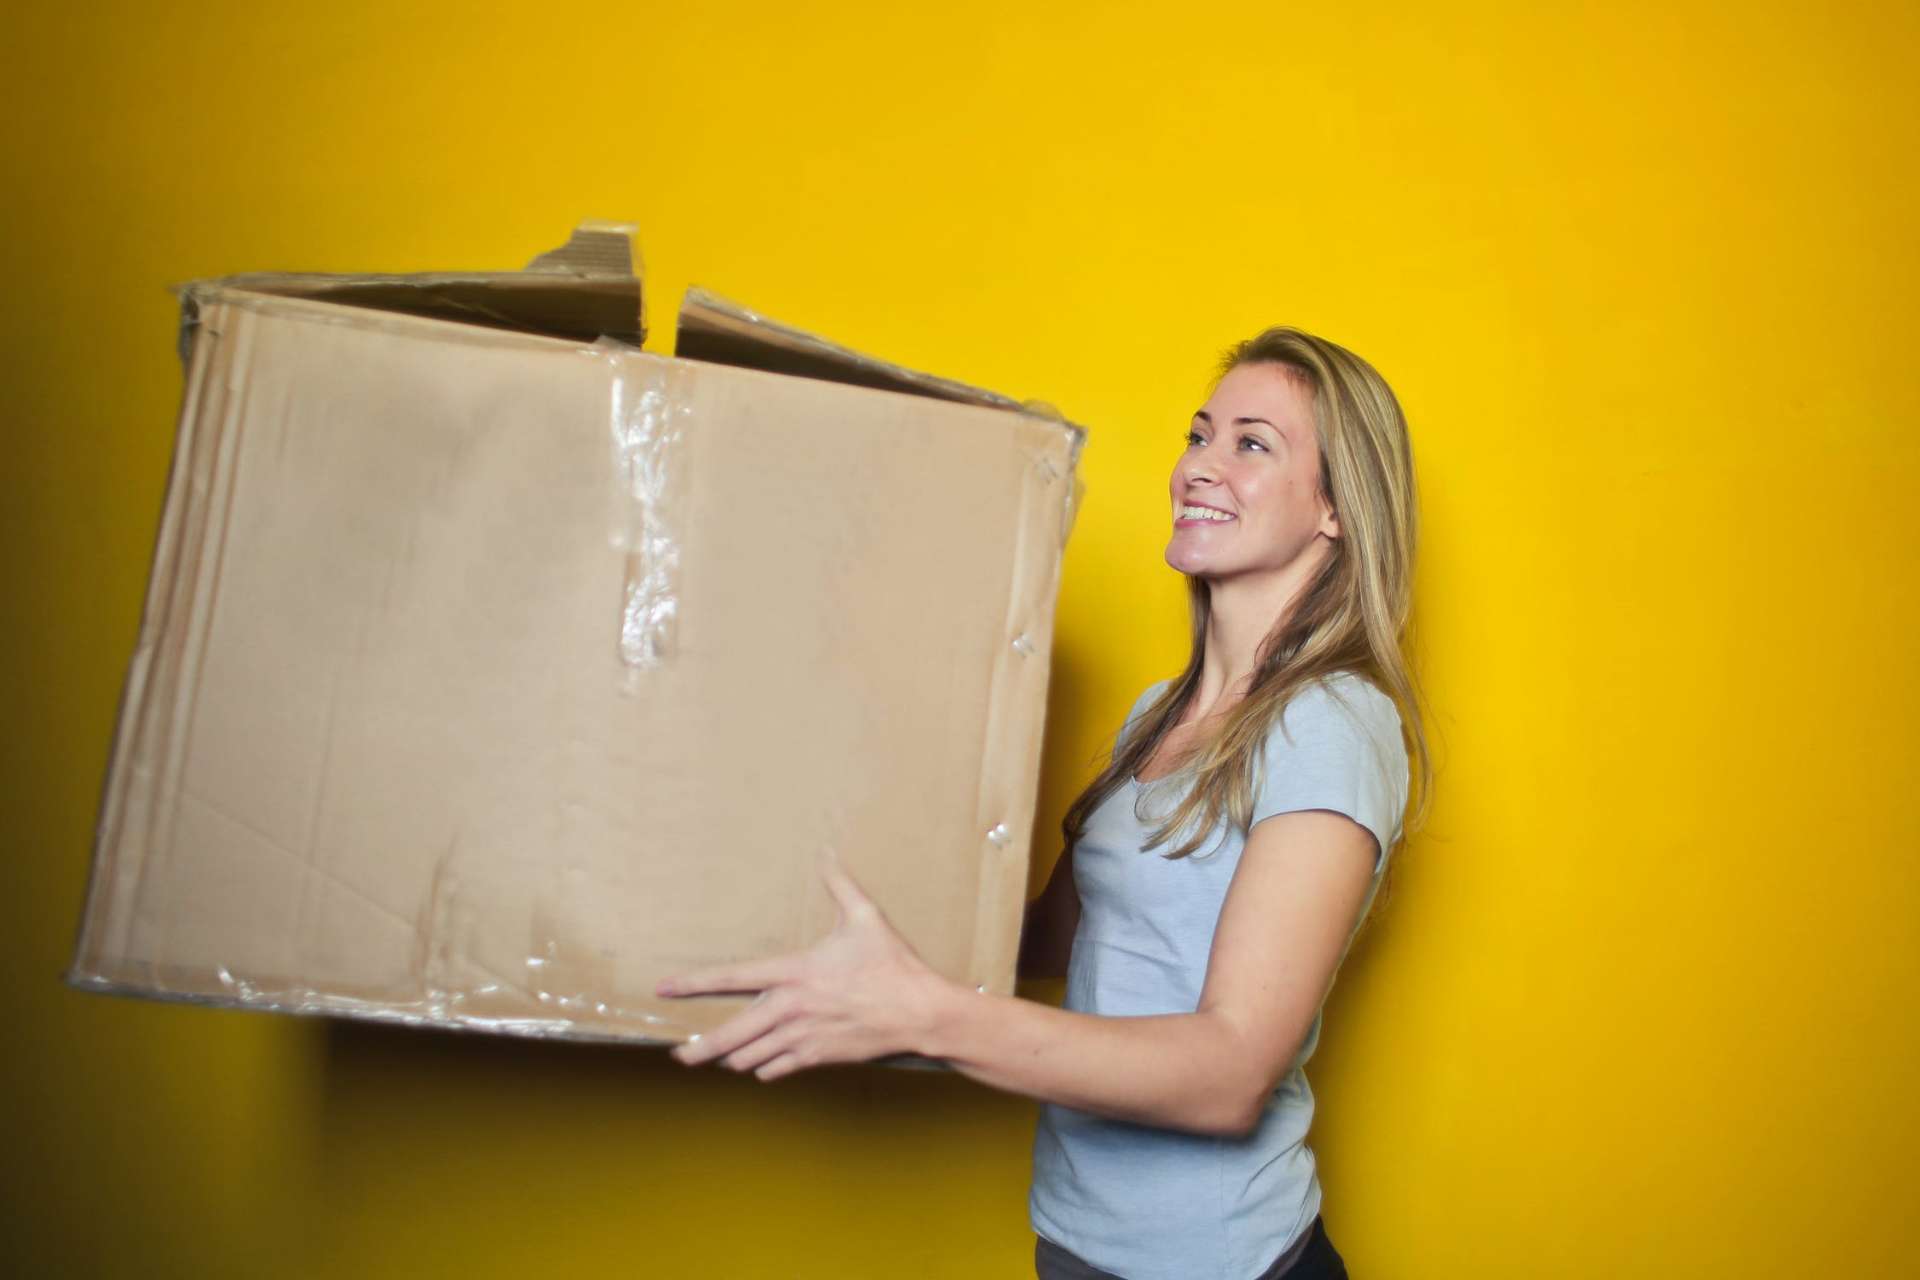 SHIPPING PROBLEMS? GET 10 FIXES TO THE MOST COMMON FULFILLMENT